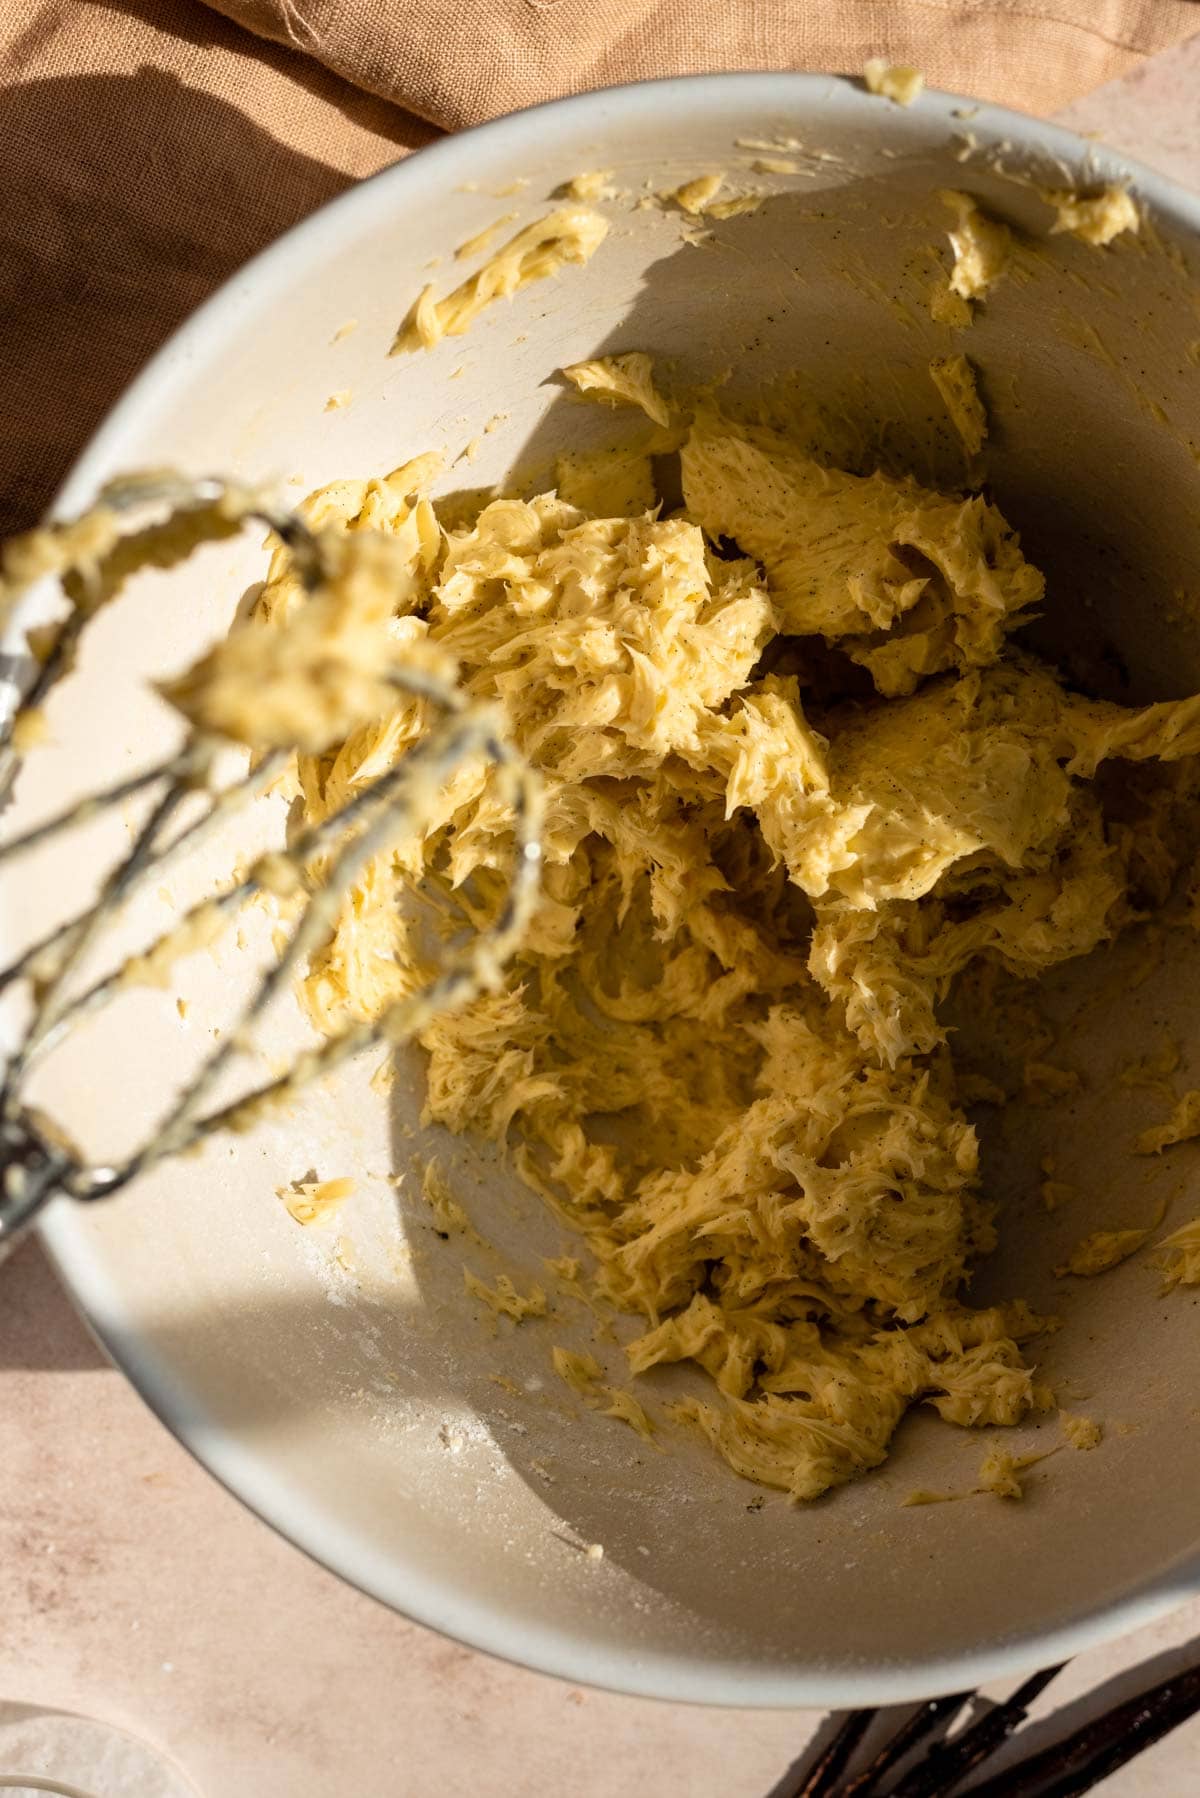 The butter mixed and whipped from an electric mixer.